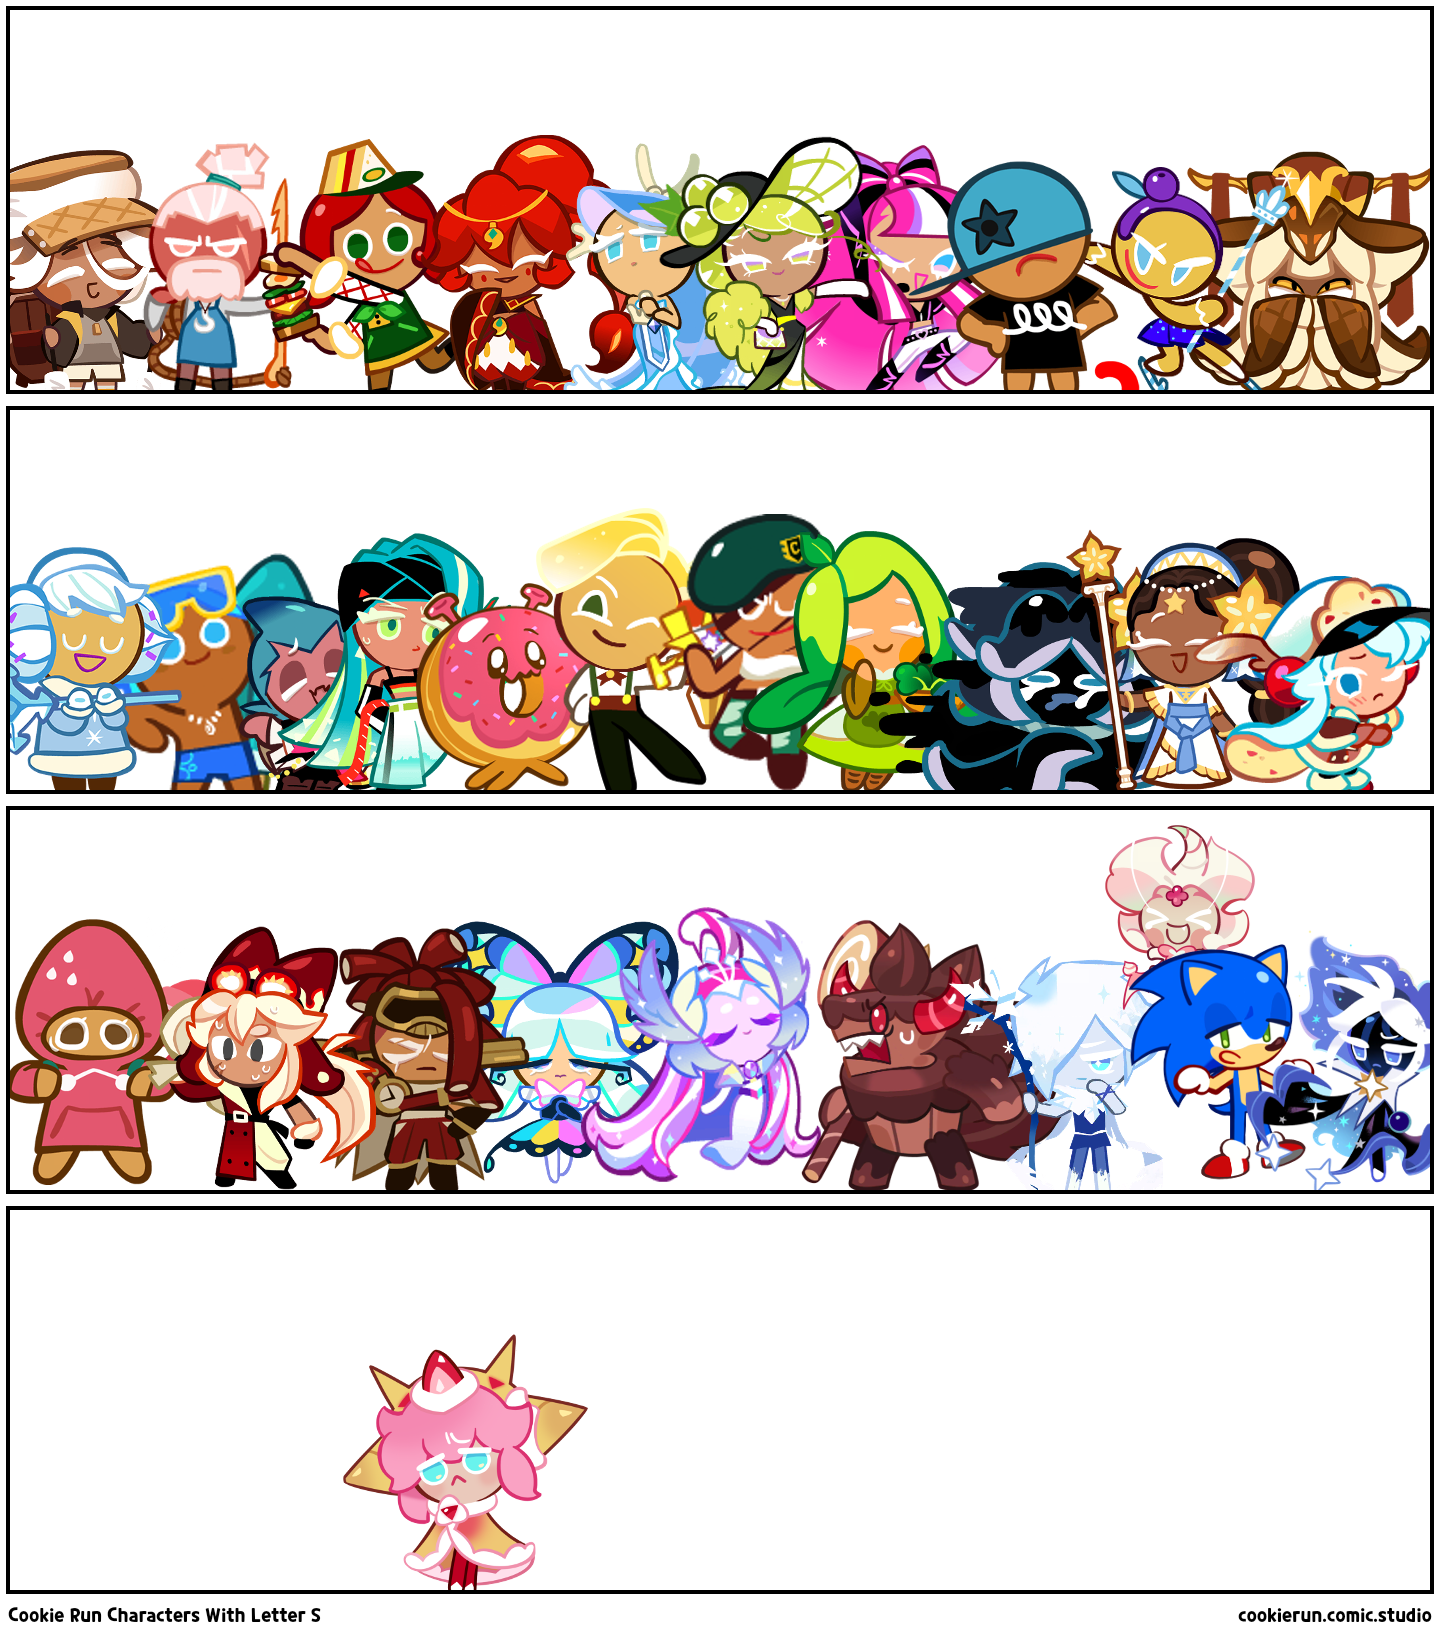 Cookie Run Characters With Letter S